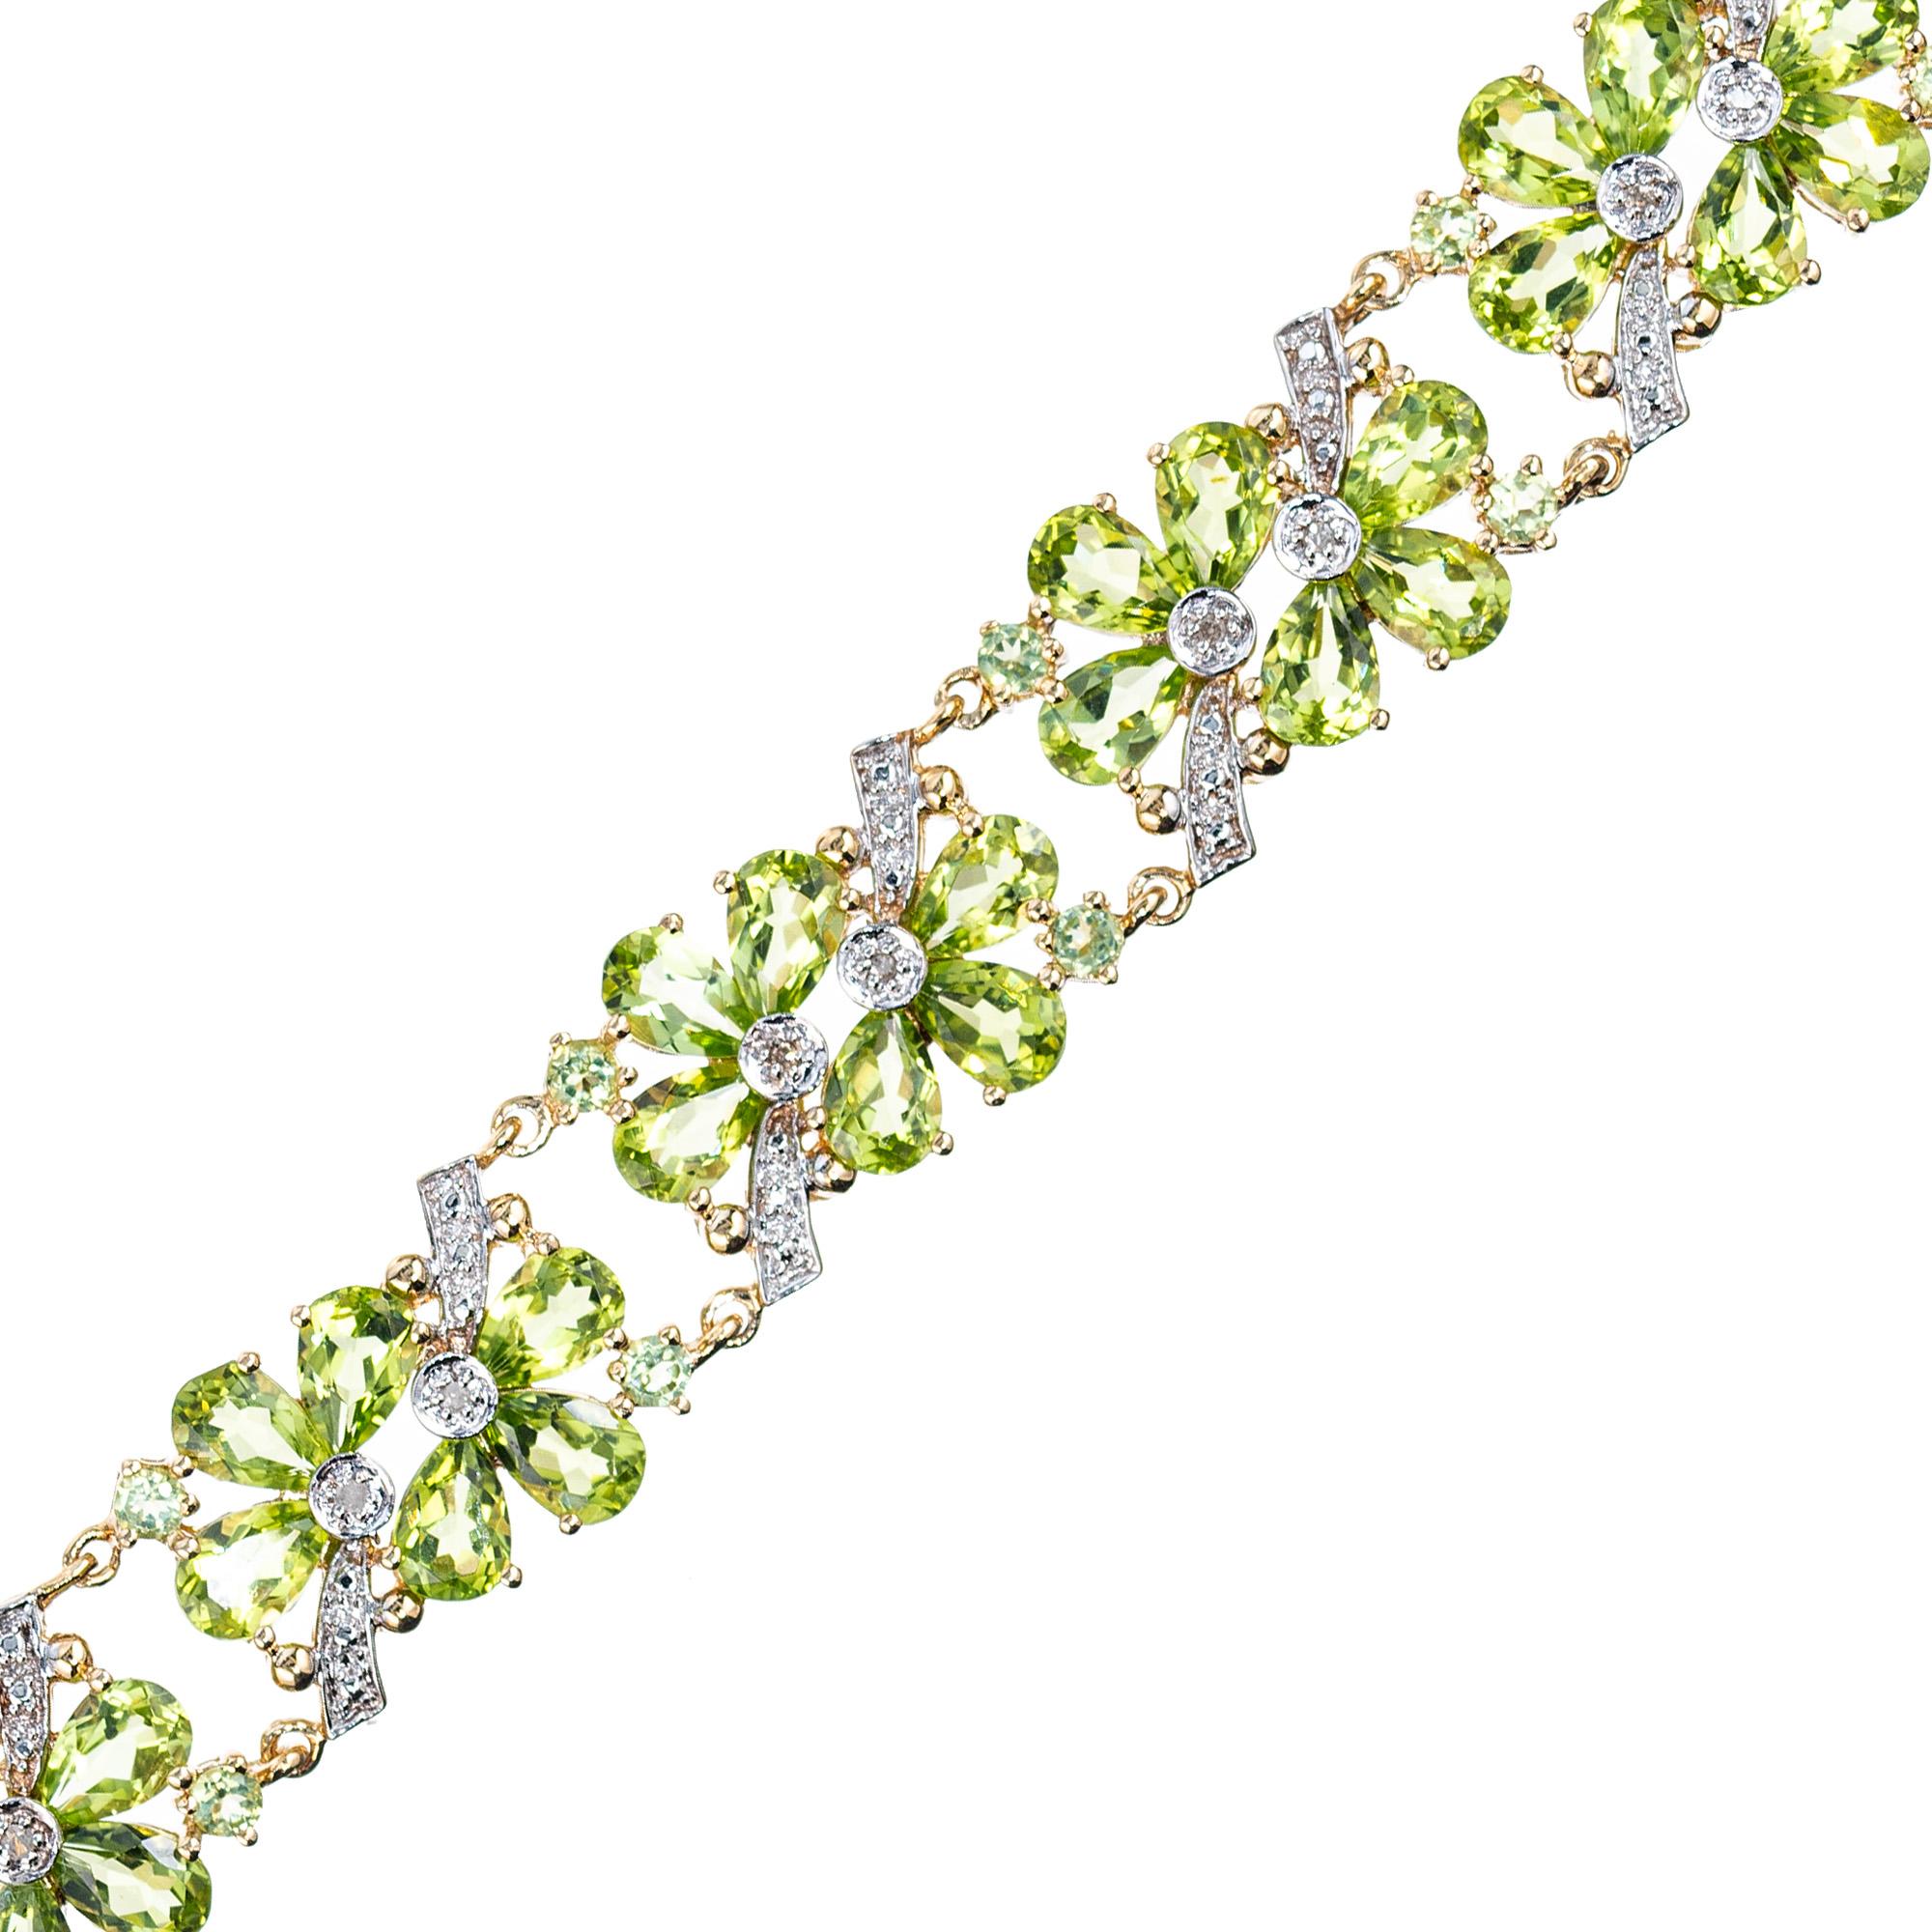 21.75 carat peridot flower bracelet with diamond accents. This bracelet is adorned with 54 pear shaped green peridots totaling 21.00cts. 18 round green peridots totaling .75cts and accented by 18 round diamonds. 7.5 inches in length. Built in catch